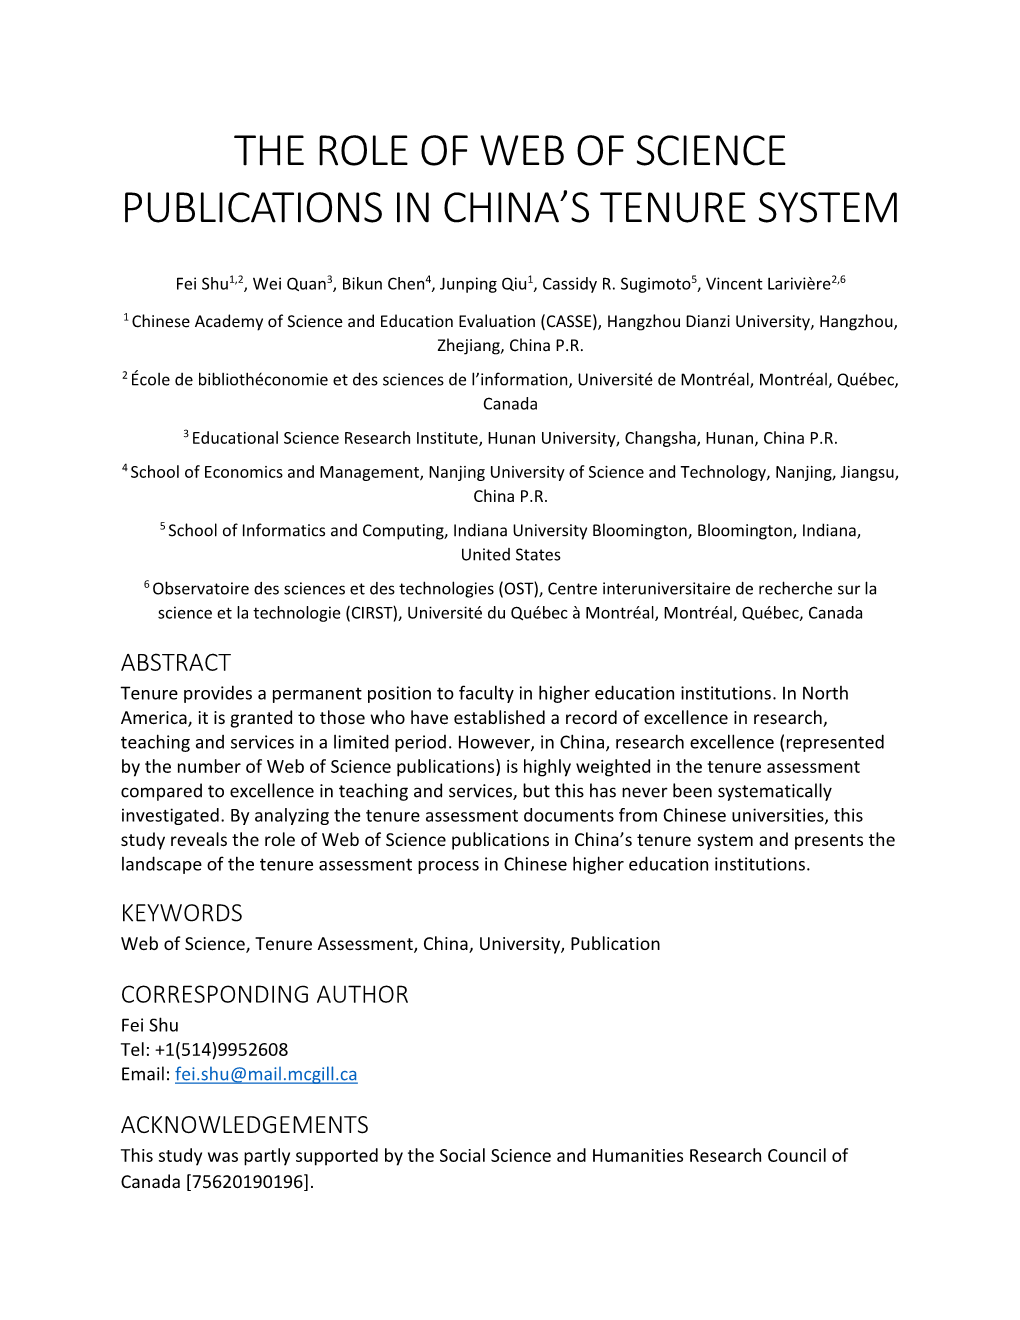 The Role of Web of Science Publications in China's